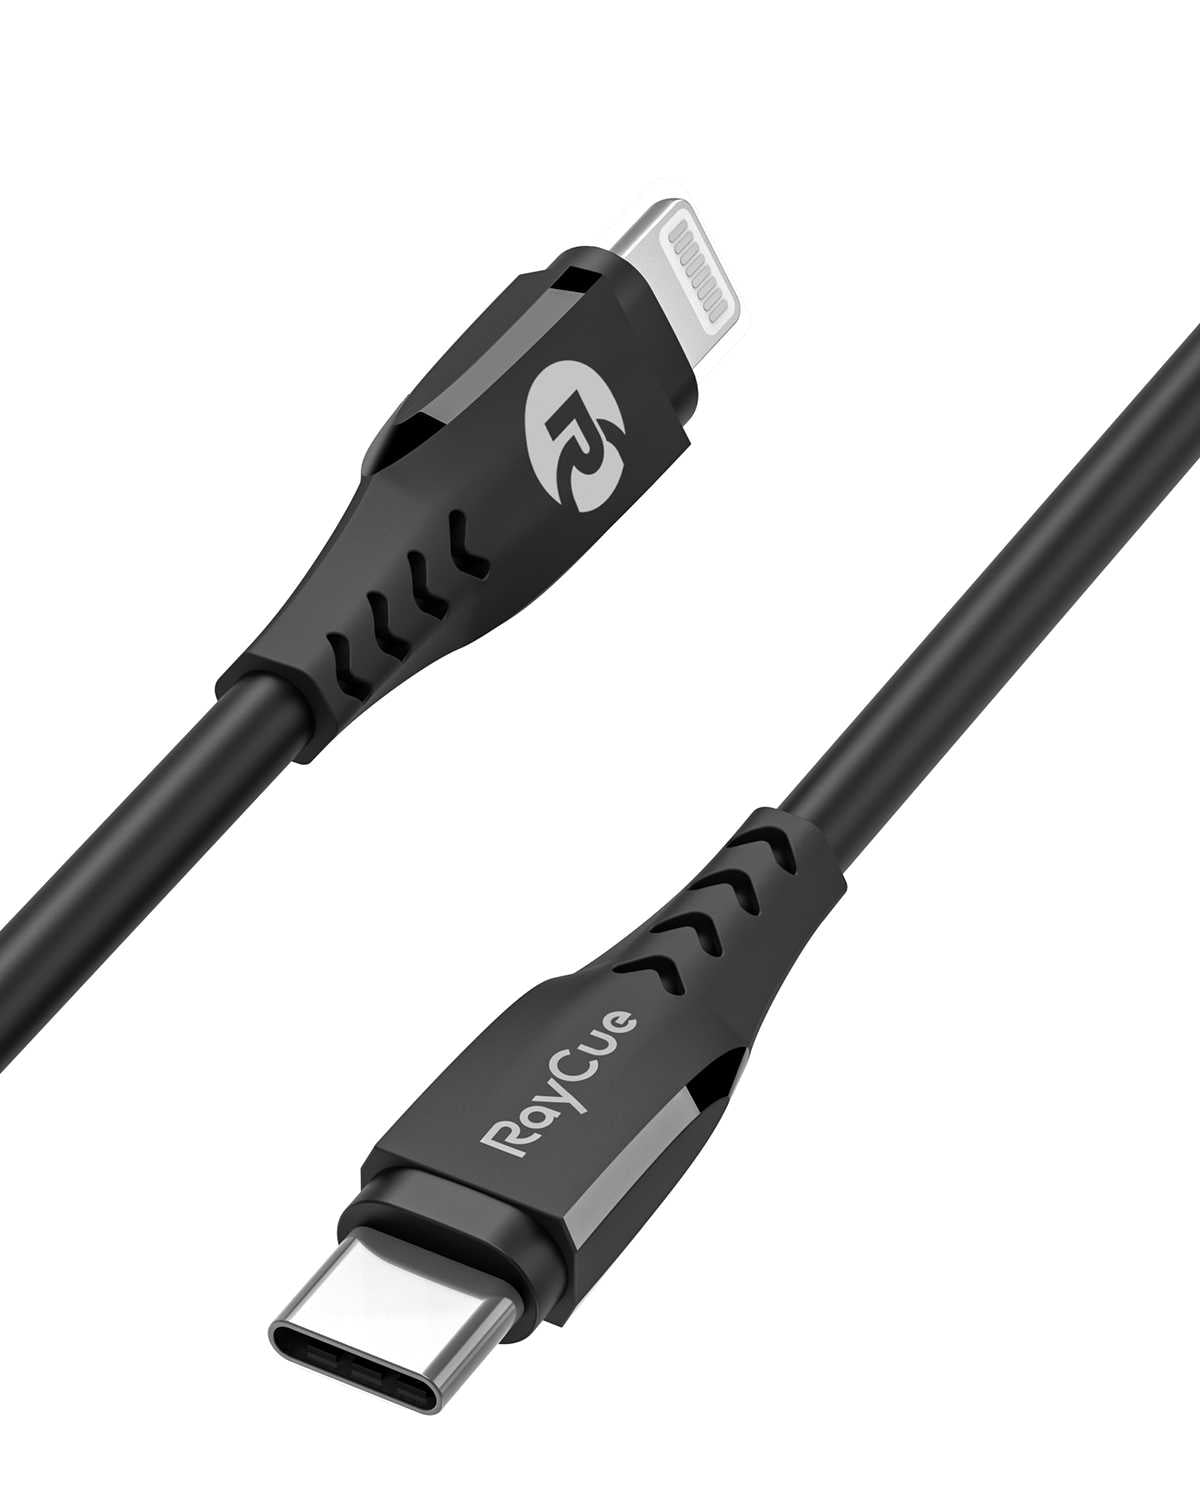 [MFI Certified] RayCue BlitzLink Flexo 1.2M PVC USB-C to Lightning Cable for iPhone iPad